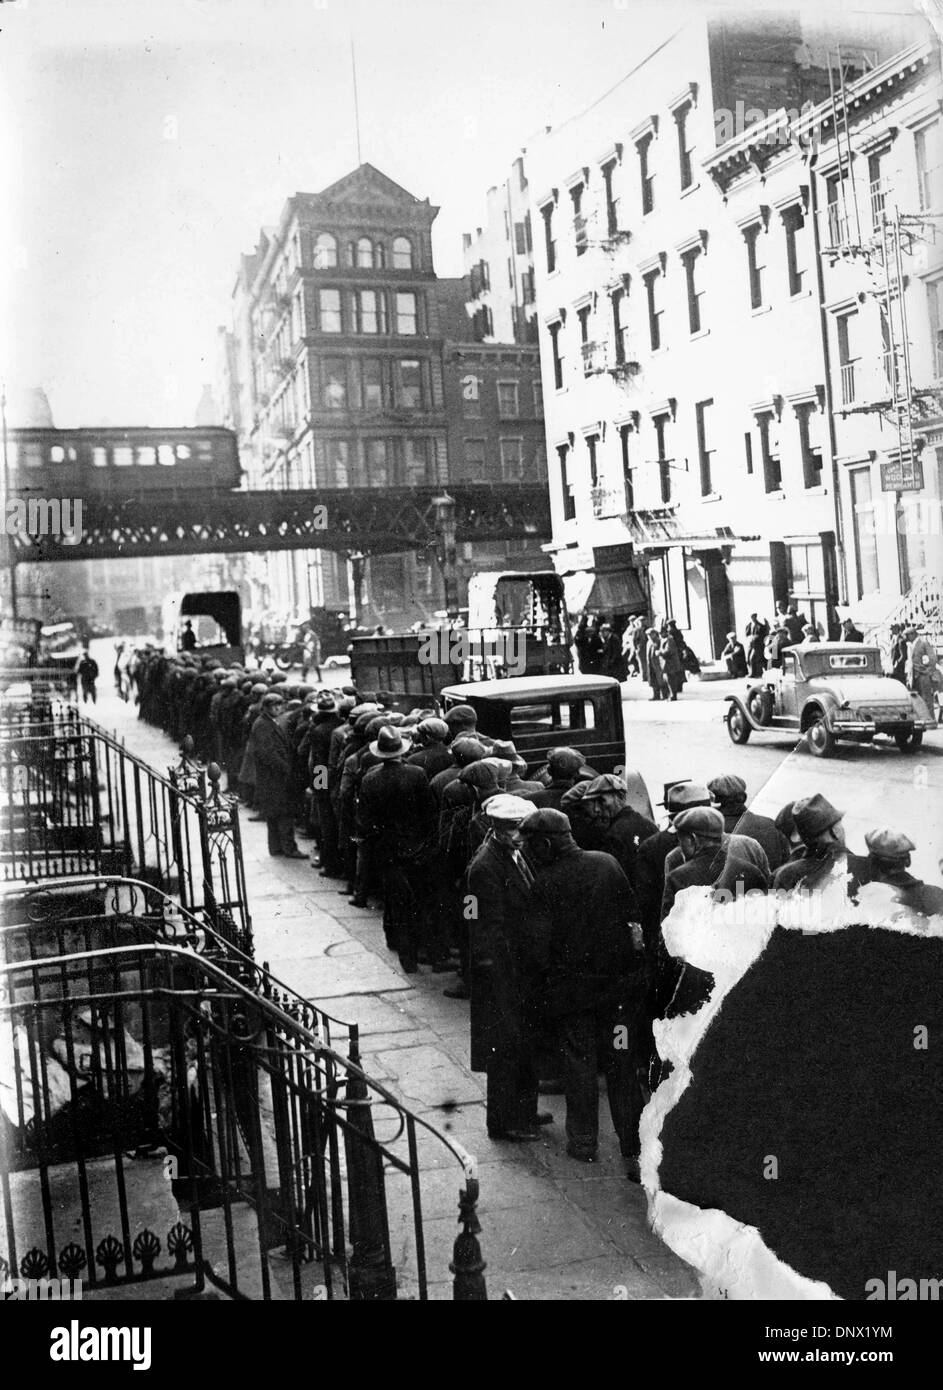 Jan. 14, 1937 - New York, NY, U.S. - For the President Franklin D. Roosevelt the unemployment was one of his greatest concerns. After he took the presidence of the US government the unemployment number has been succesfully reduced. This picture shows unemployed people making a line in front of a restaurant in New York. (Credit Image: © KEYSTONE Pictures USA/ZUMAPRESS.com) Stock Photo